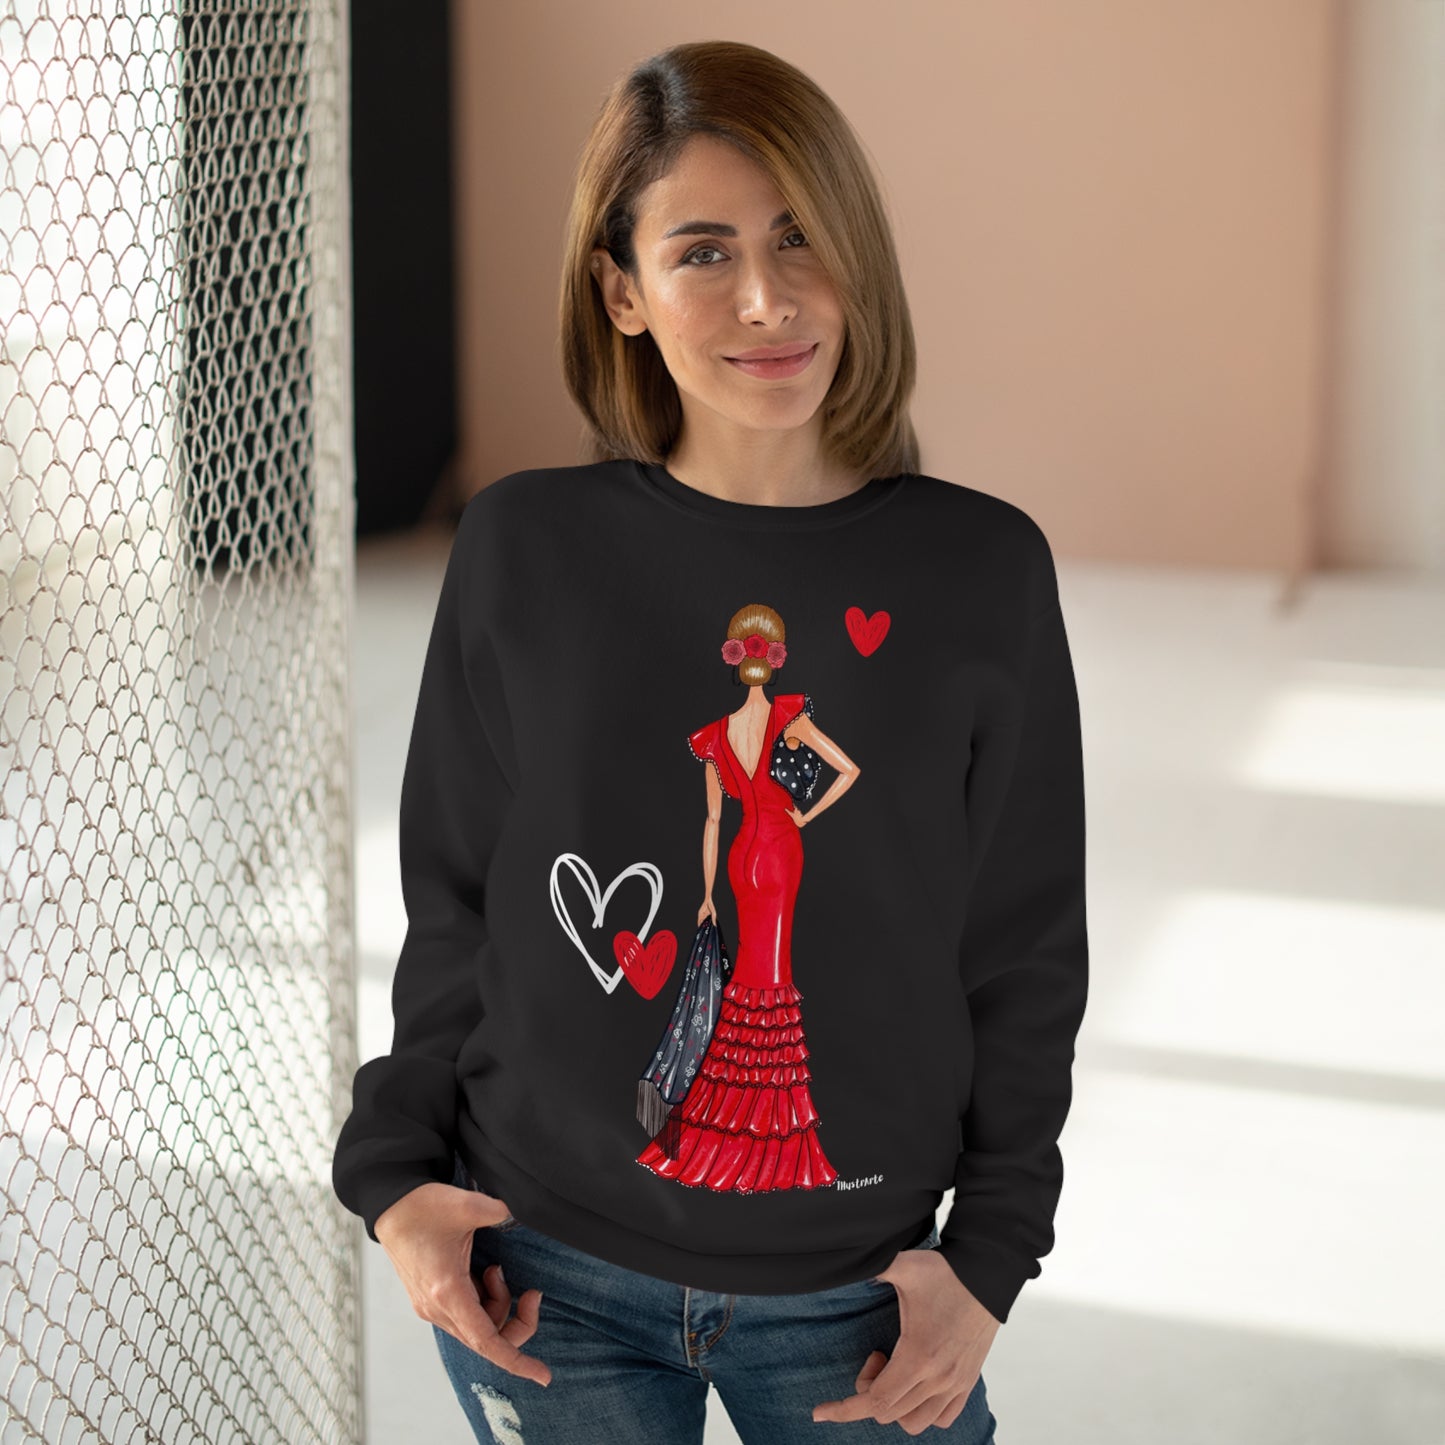 a woman wearing a black sweater with a picture of a woman in a red dress